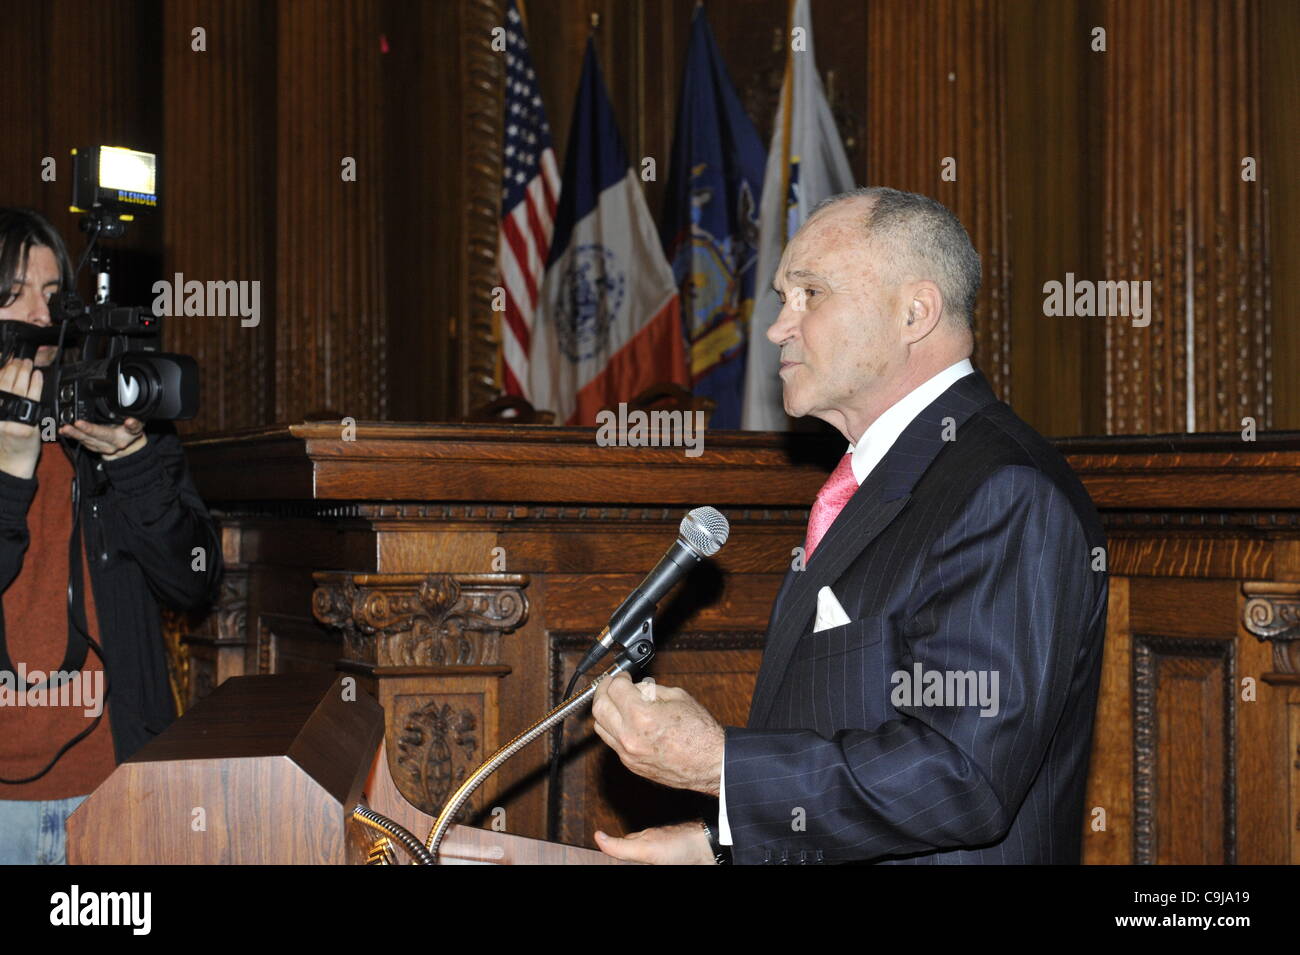 January 11, 2012 - Brooklyn, New York USA: NYPD New York City Police Commissioner Ray Kelly giving Keynote Speech at 2nd Annual Interfaith Memorial Service for Haiti, Wednesday night at Brooklyn Borough Hall, NYC. Stock Photo